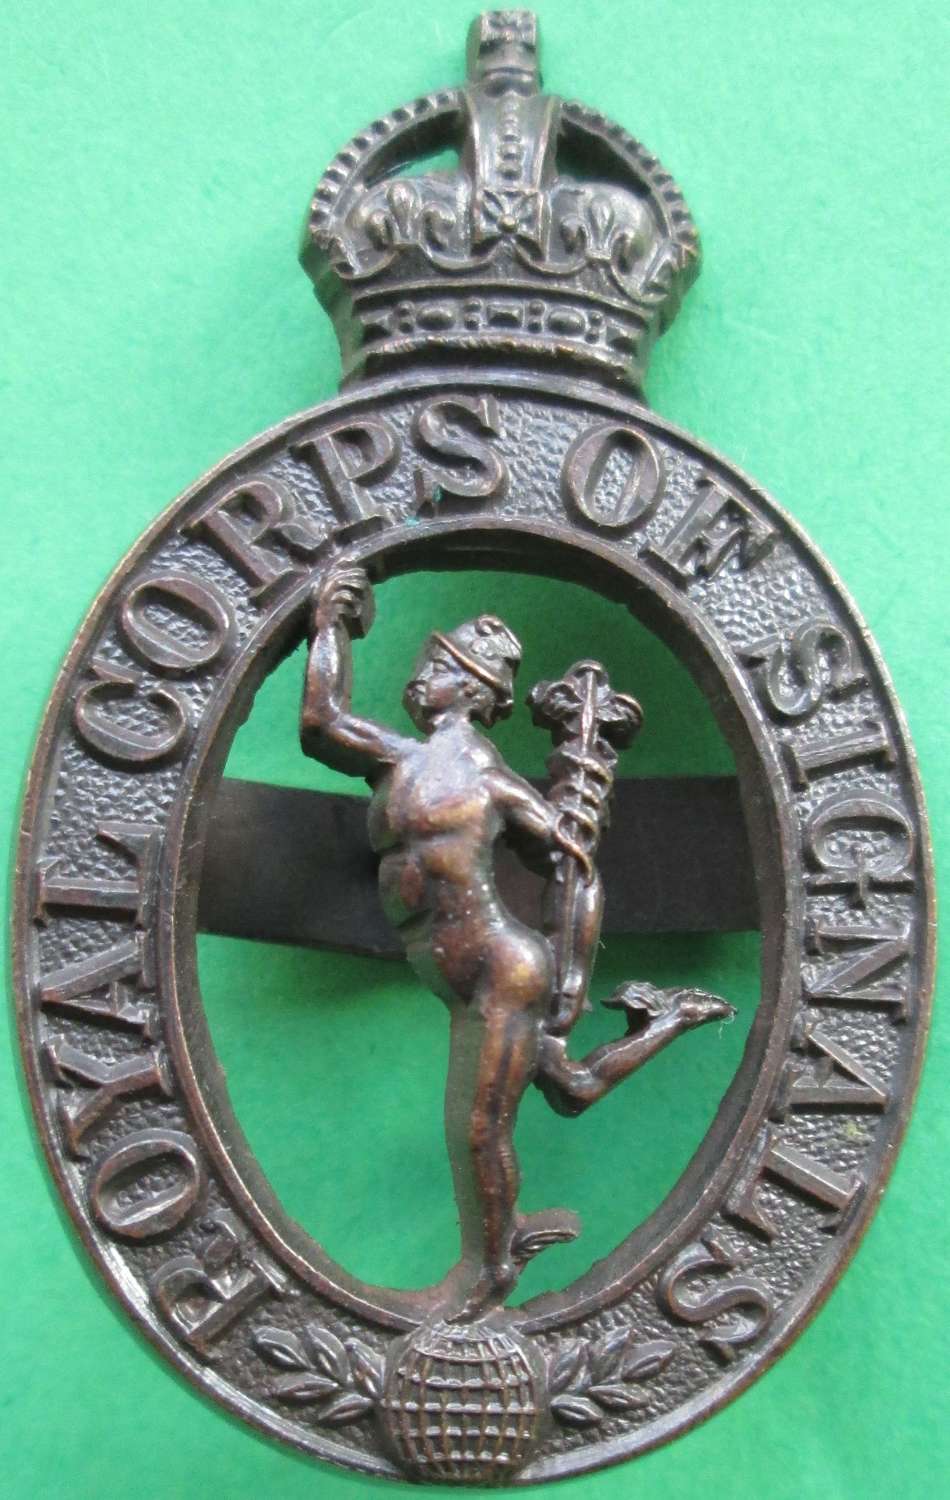 A RARE ROYAL CORPS OF SIGNALS OFFICERS BRONZE CAP BADGE